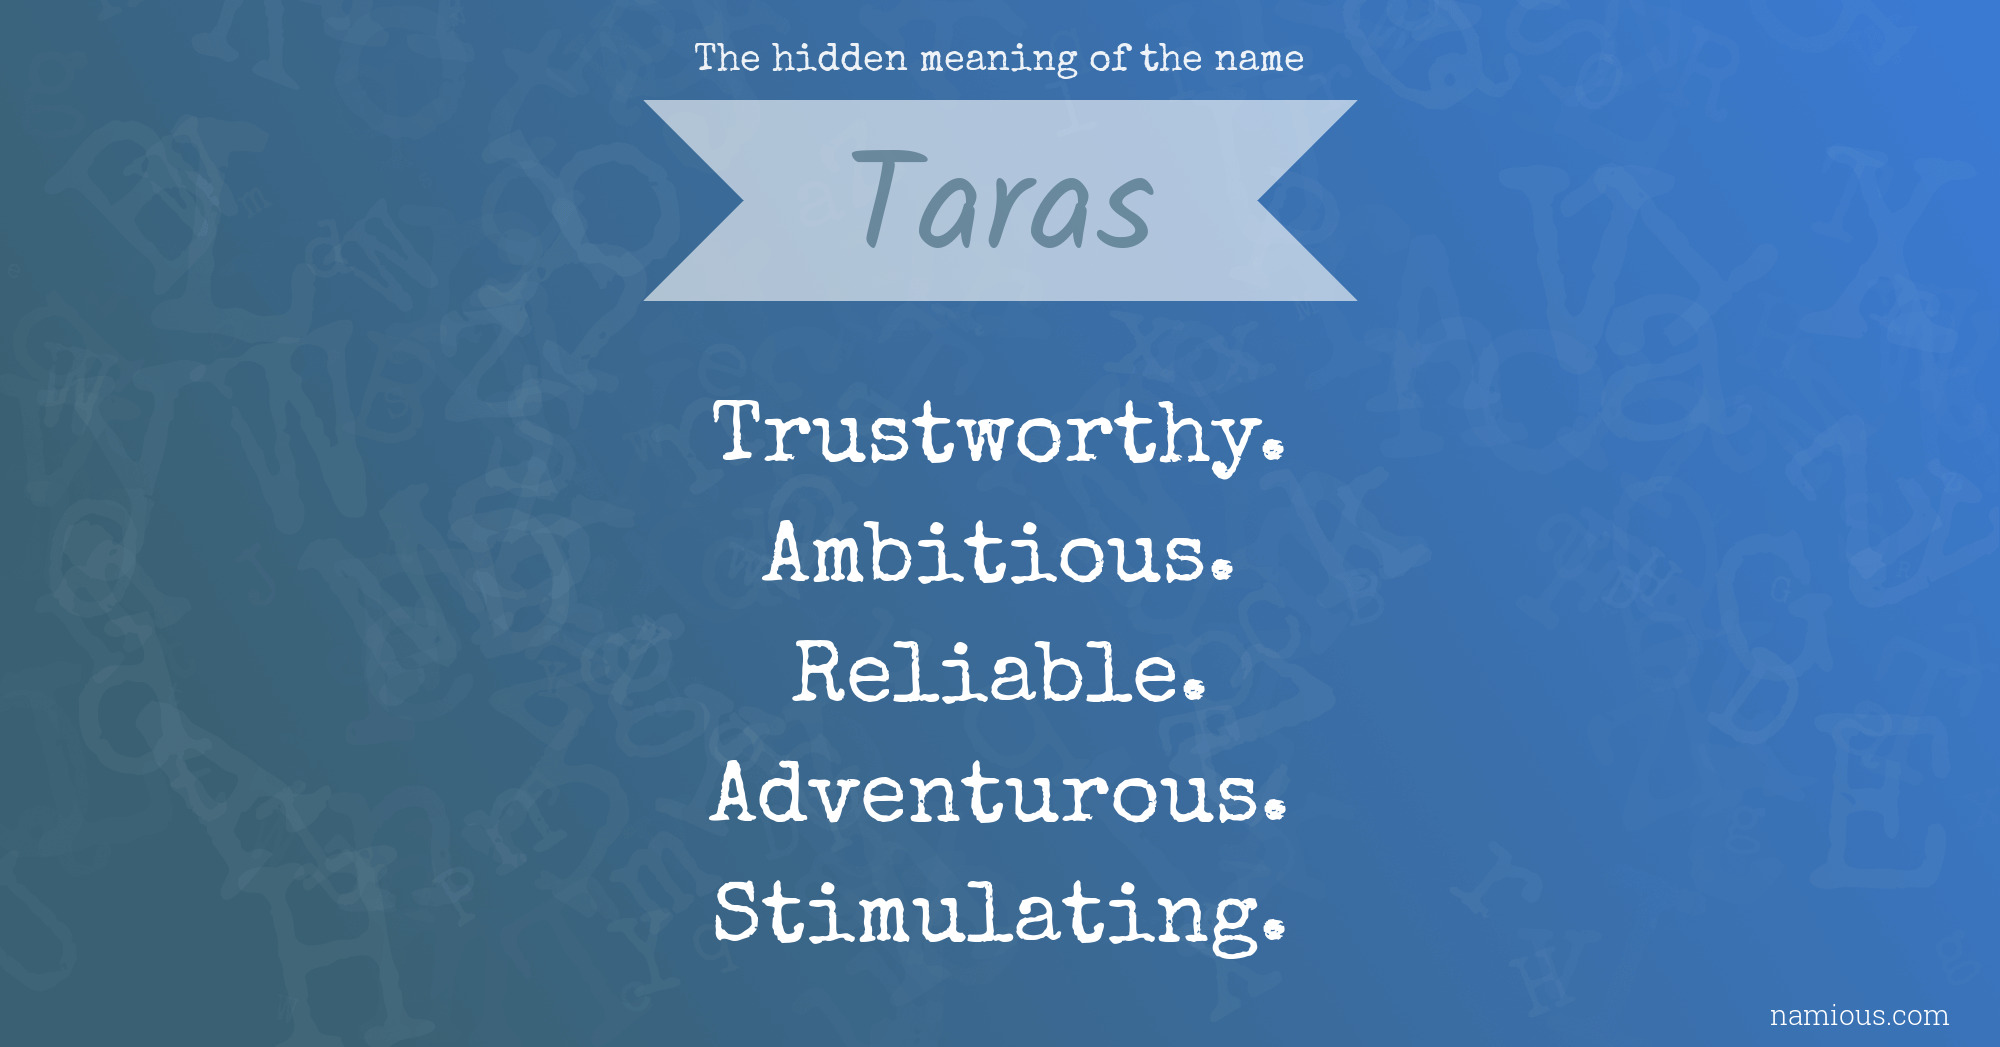 The hidden meaning of the name Taras